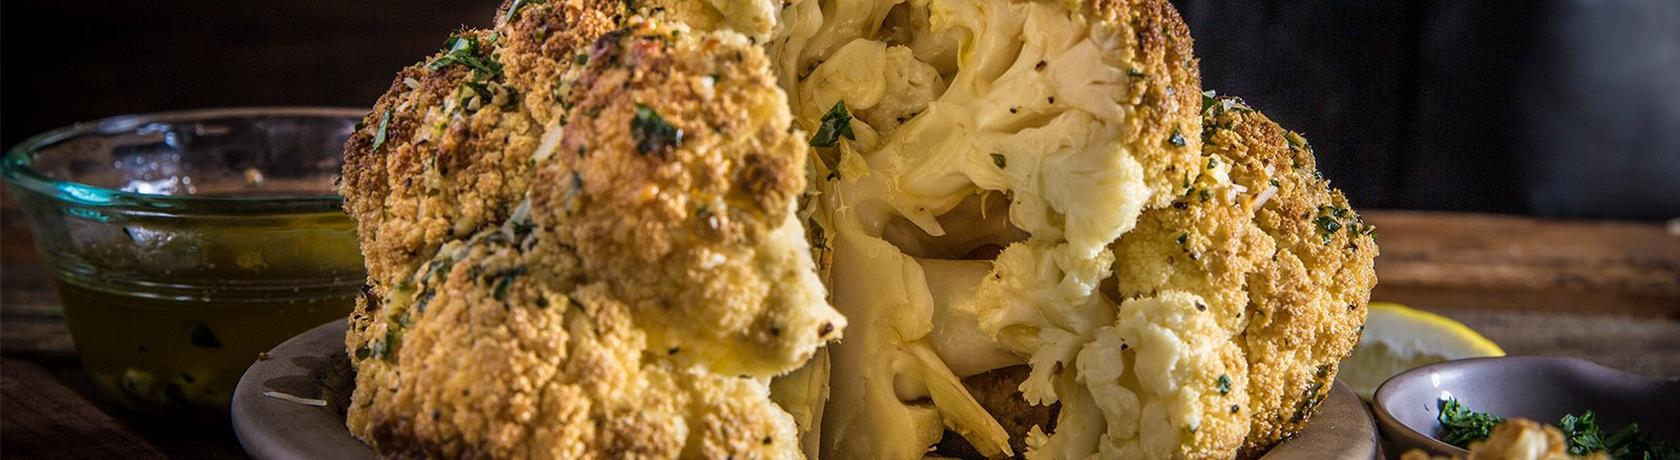 image of Whole Roasted Cauliflower With Garlic Parmesan Butter